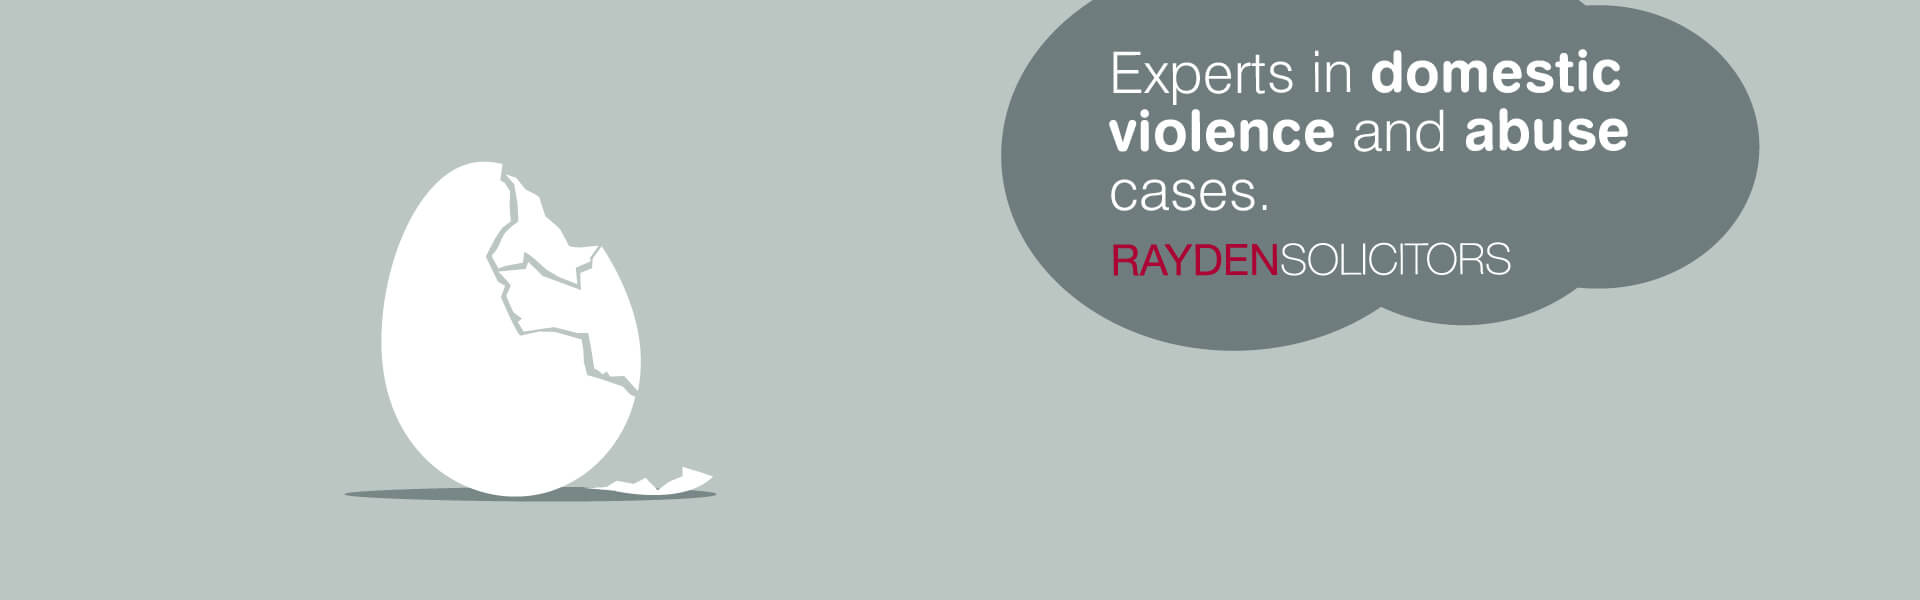 Experts in domestic violence and abuse cases